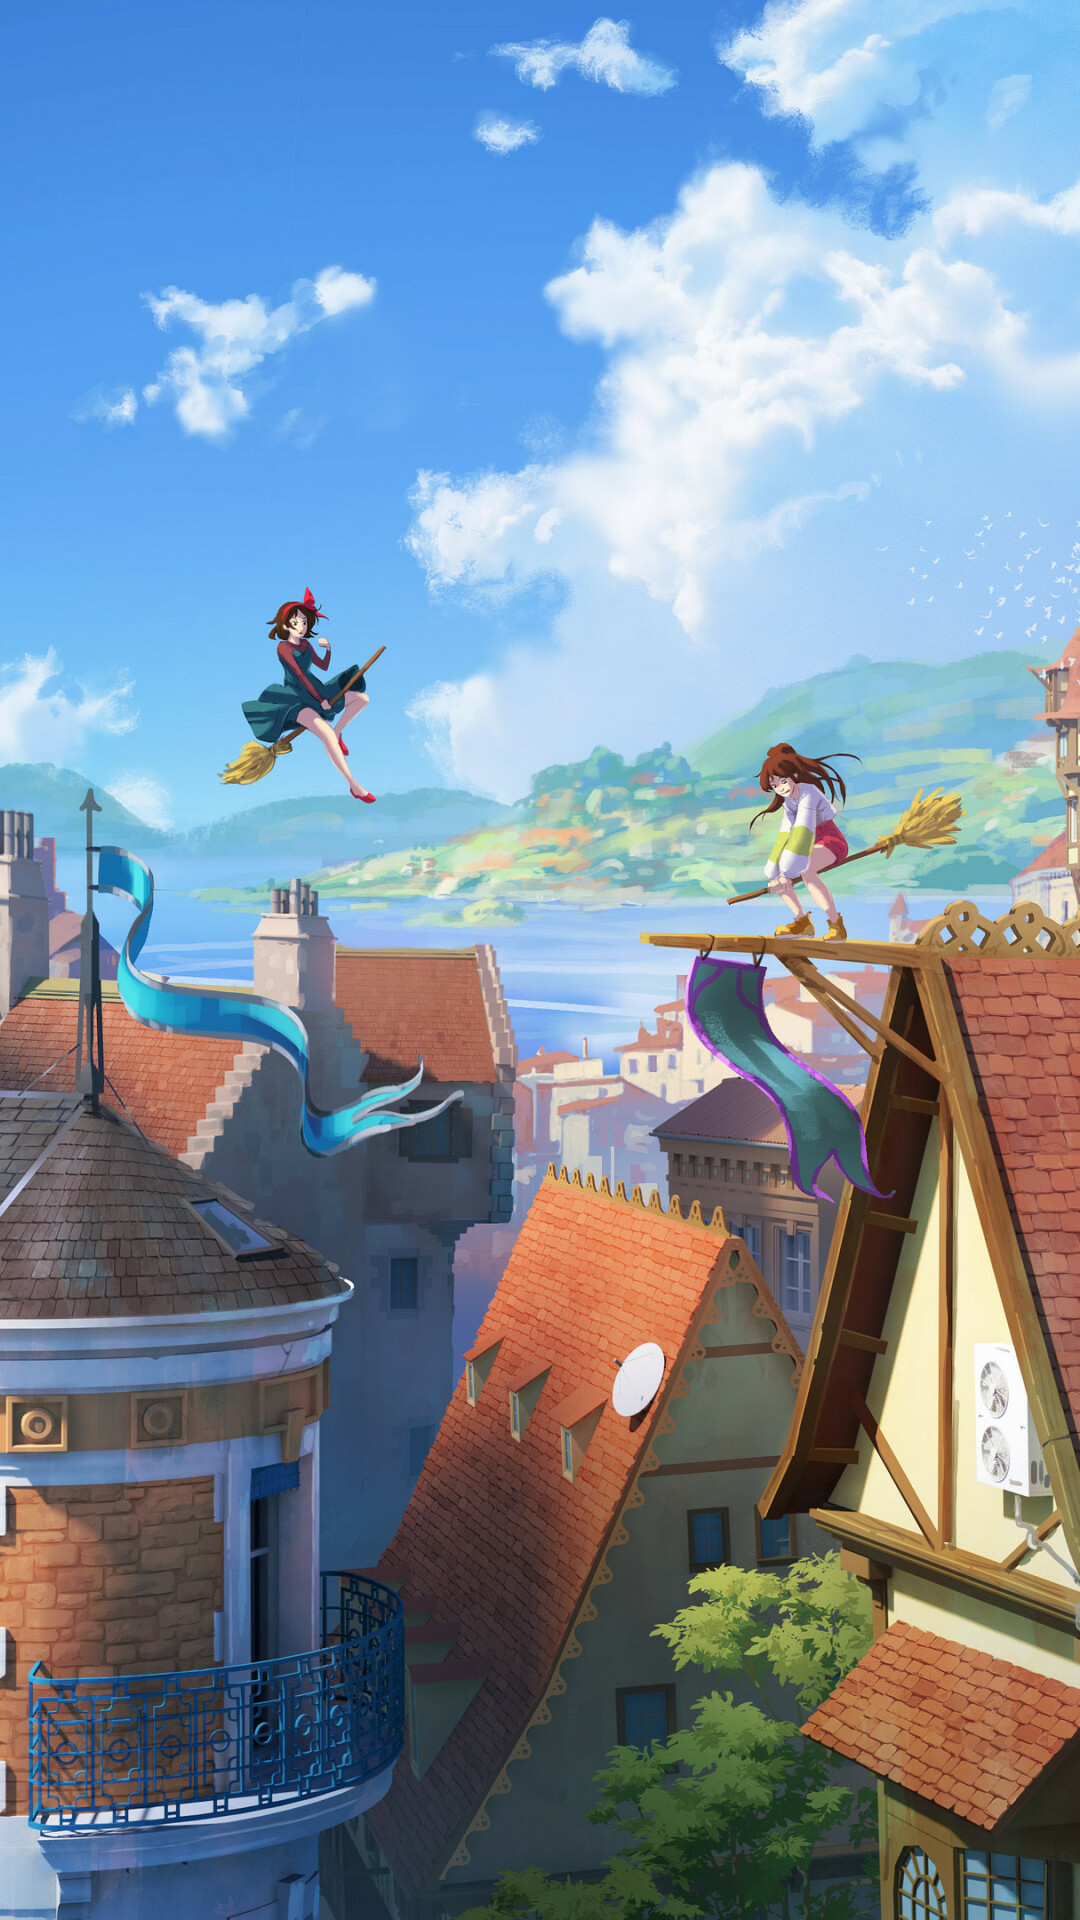 HD wallpaper, 1080X1920 Full Hd Phone, Kiki And Chihiro Rooftop, Phone Full Hd Kikis Delivery Service Background Image, Serene Atmosphere, Sylvain Sarrailh Artwork, Anime Illustration